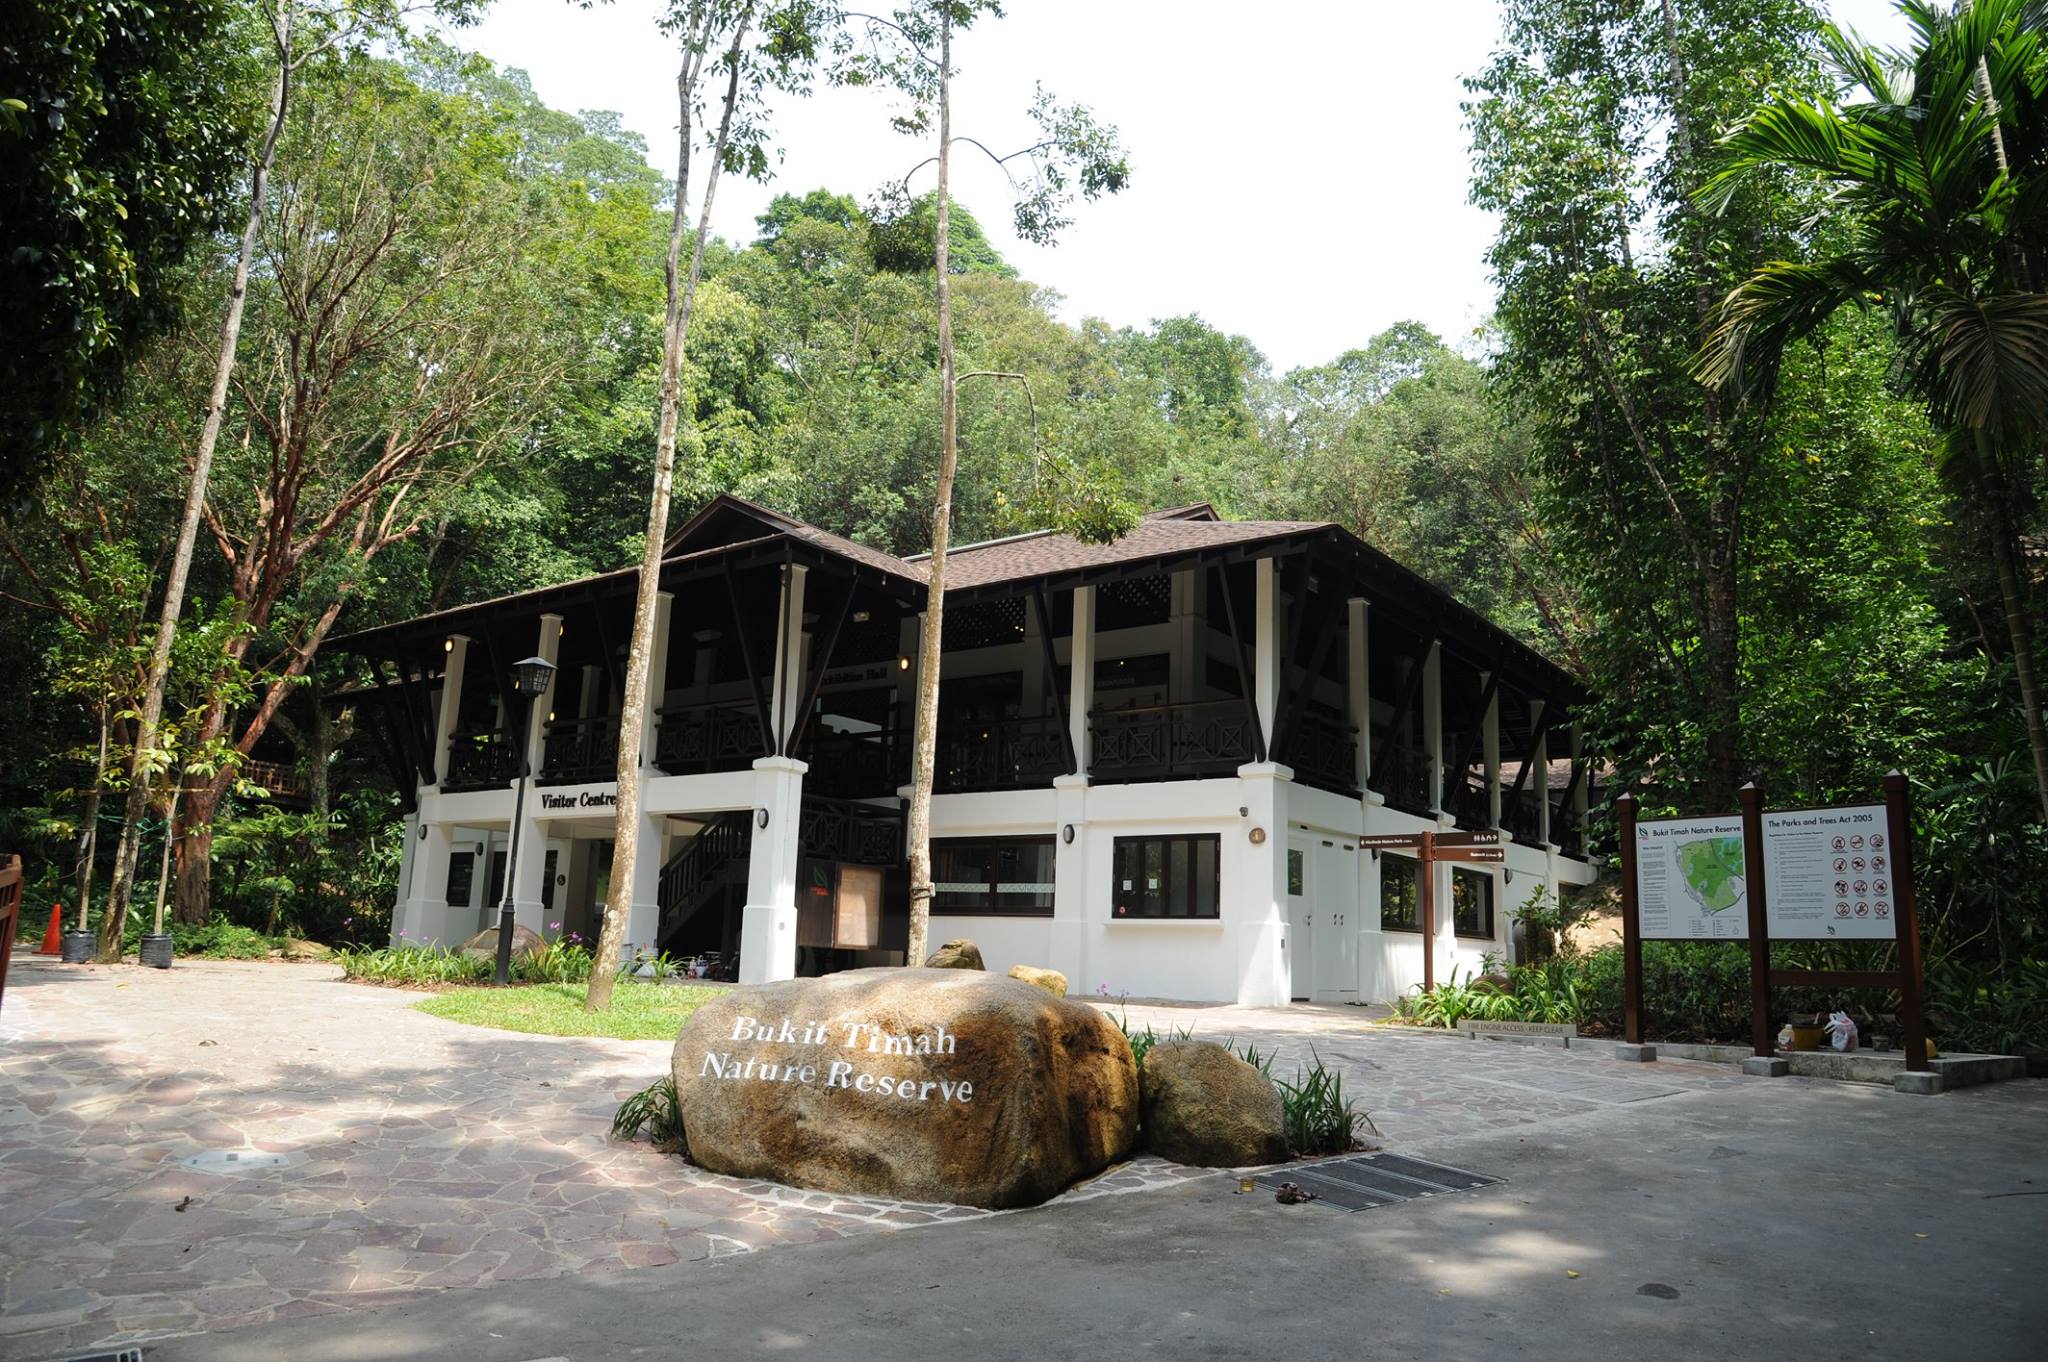 Bukit Timah Nature Reserve reopens! Here’s what’s new